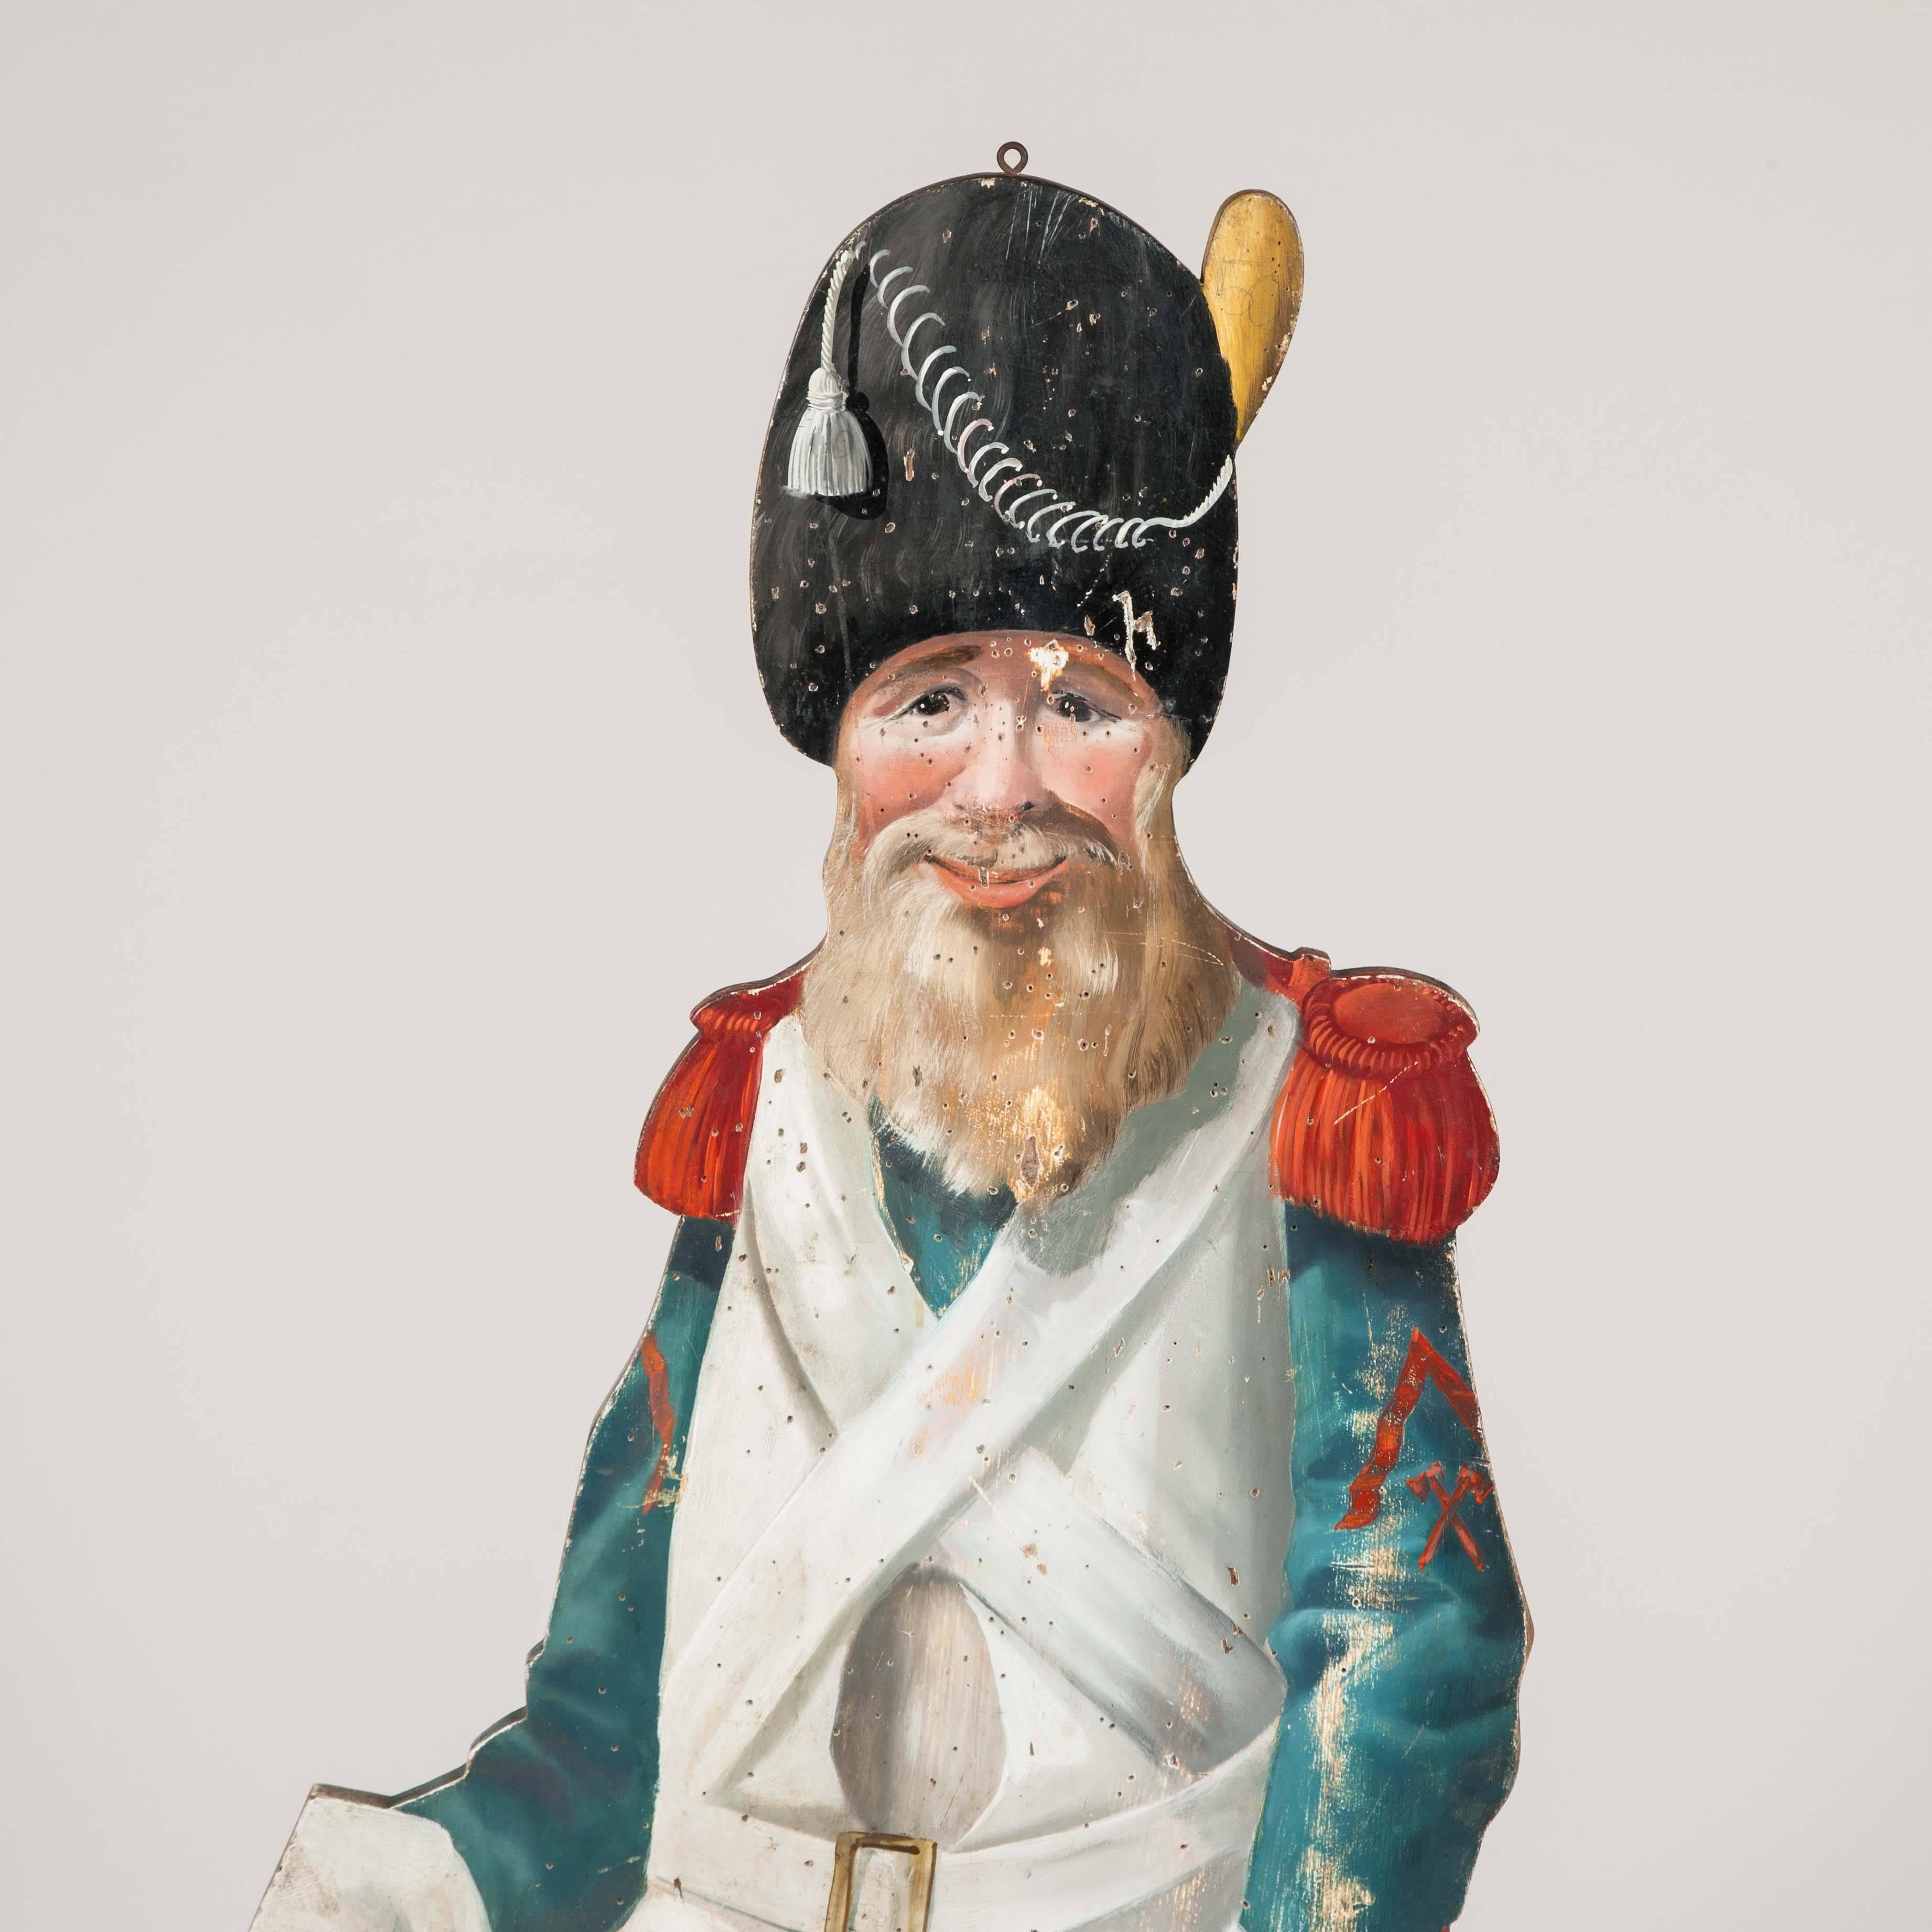 A painted figure of sapeur Camember from Les Face´ties du sapeur Camember. 

The Face´ties Sapper Camember is a cartoon strip created by Christophe and published in Le Petit Franc¸ais illustre´ between 1890 and 1896.